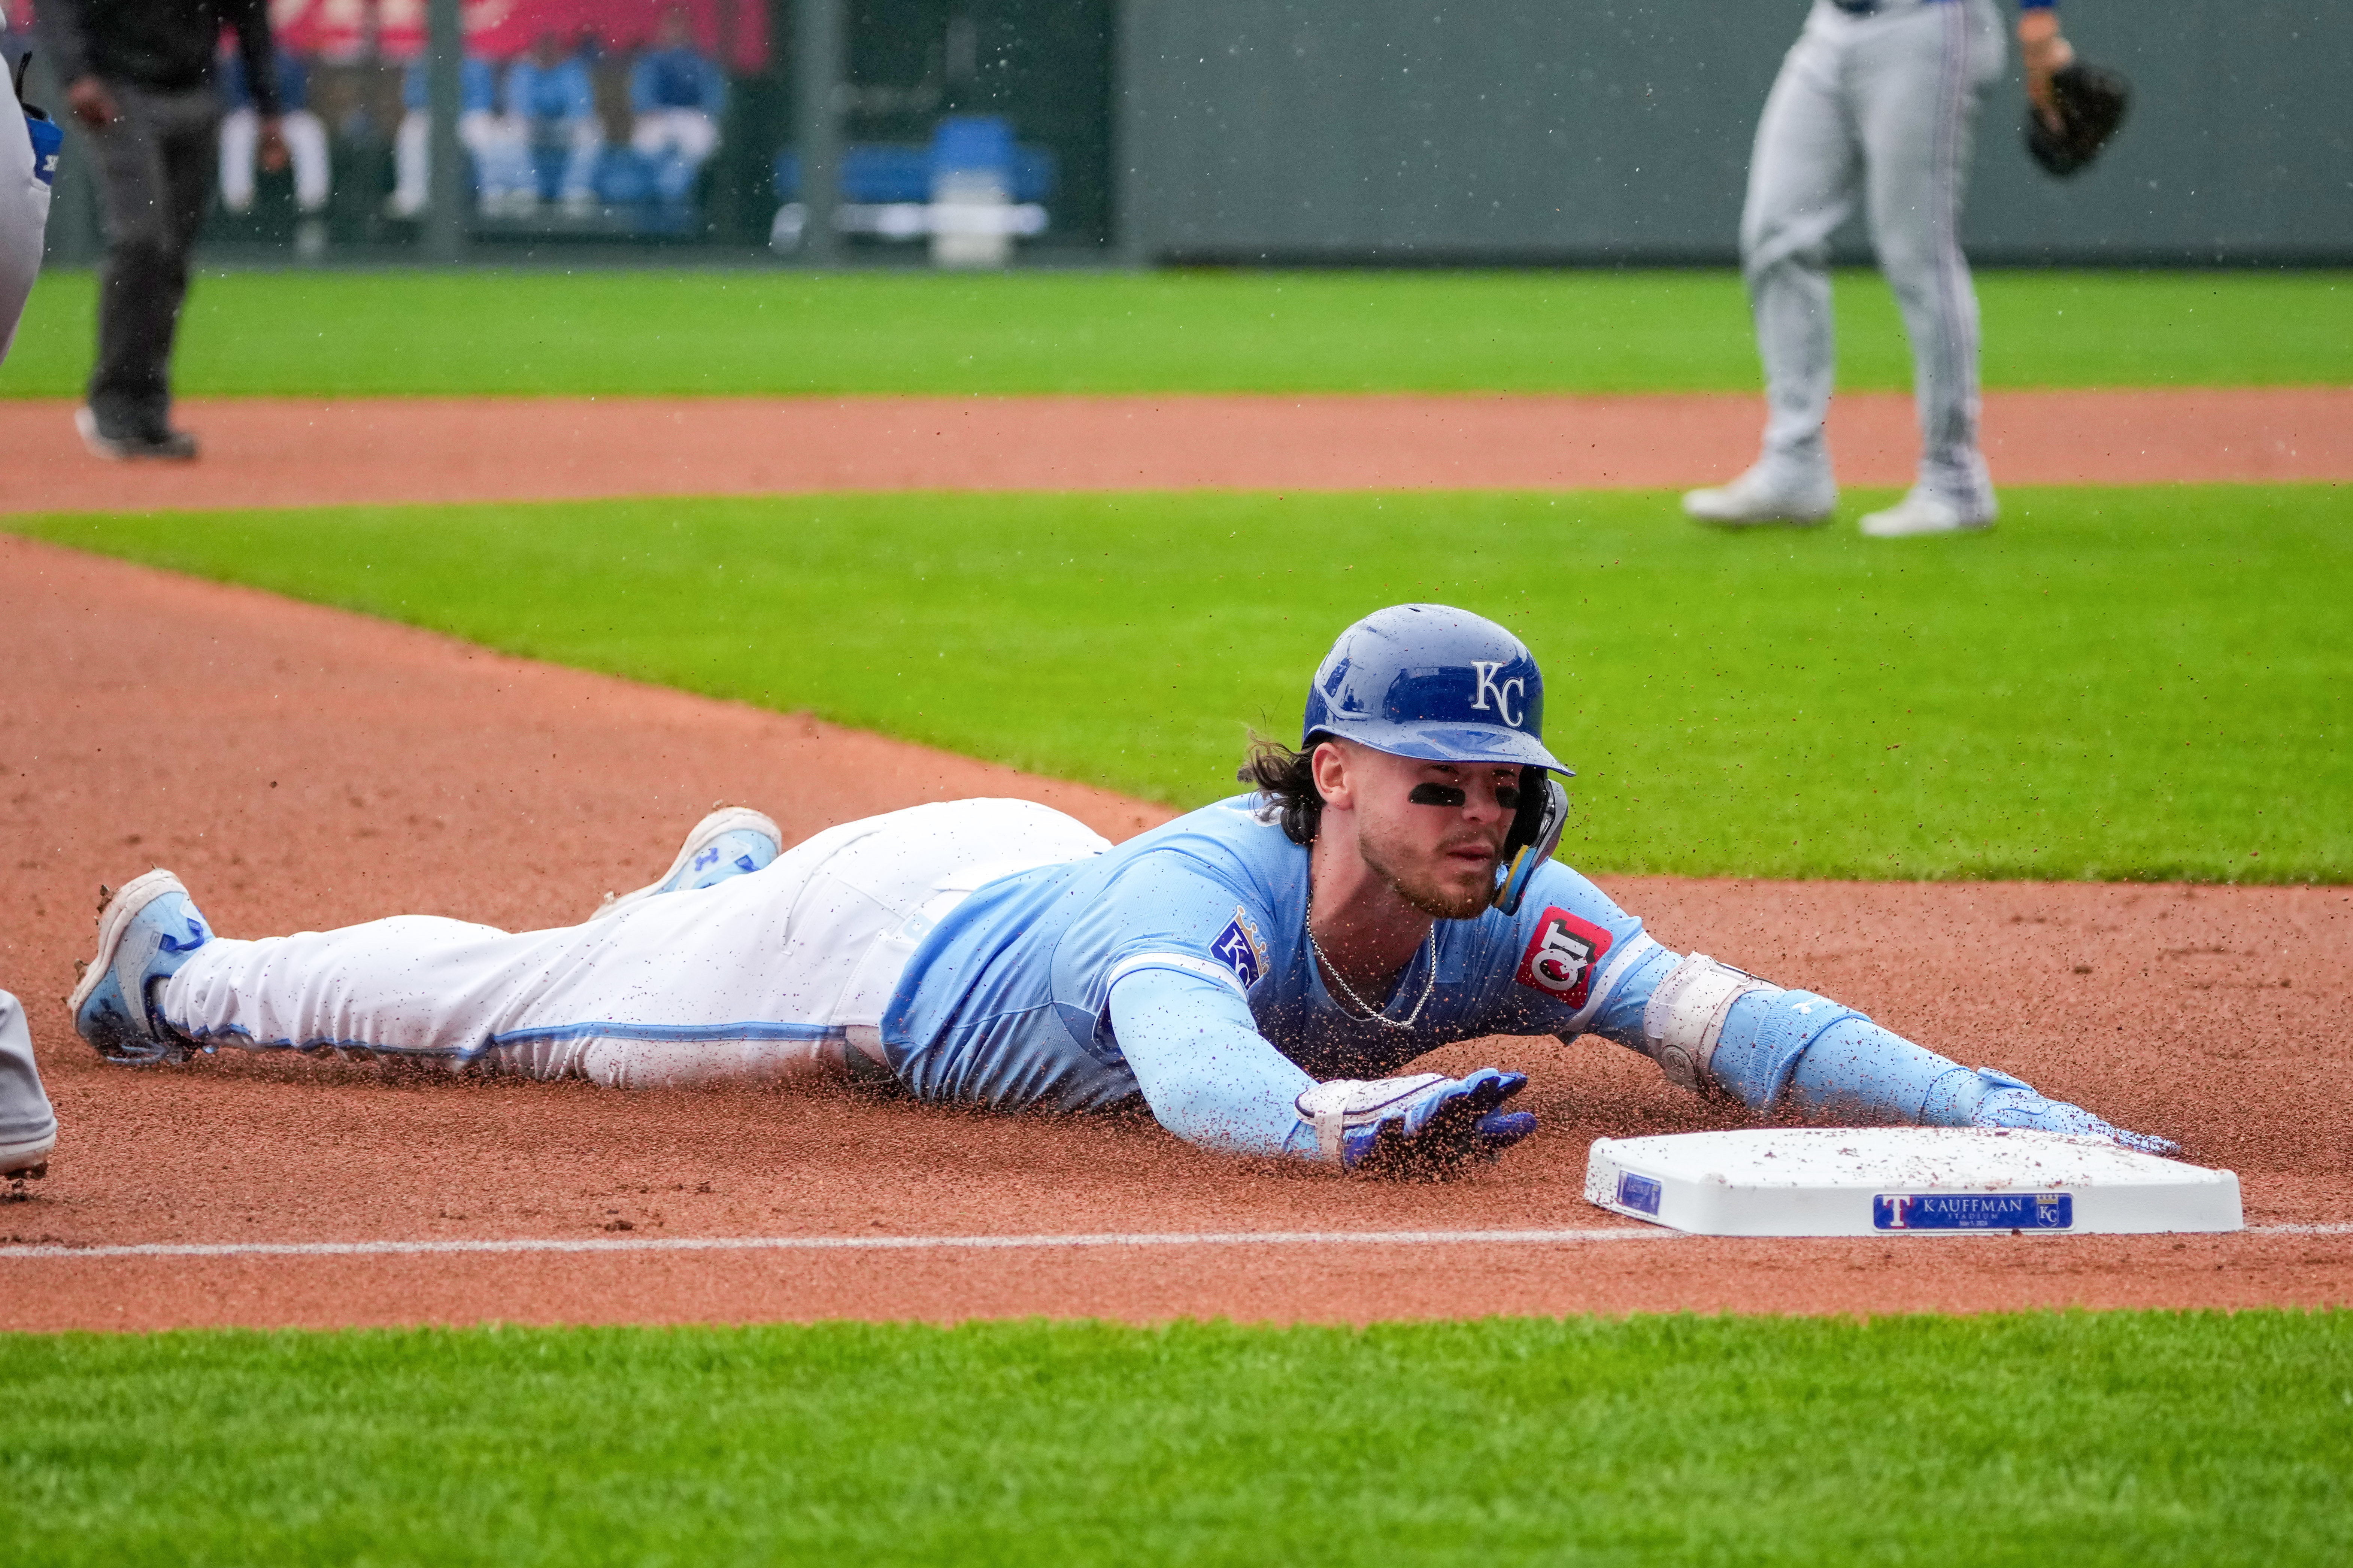 Kansas City Royals shortstop Bobby Witt Jr. (7) slides into third safely against the Texas Rangers after hitting a triple in the first inning at Kauffman Stadium. Mandatory Credit: Denny Medley